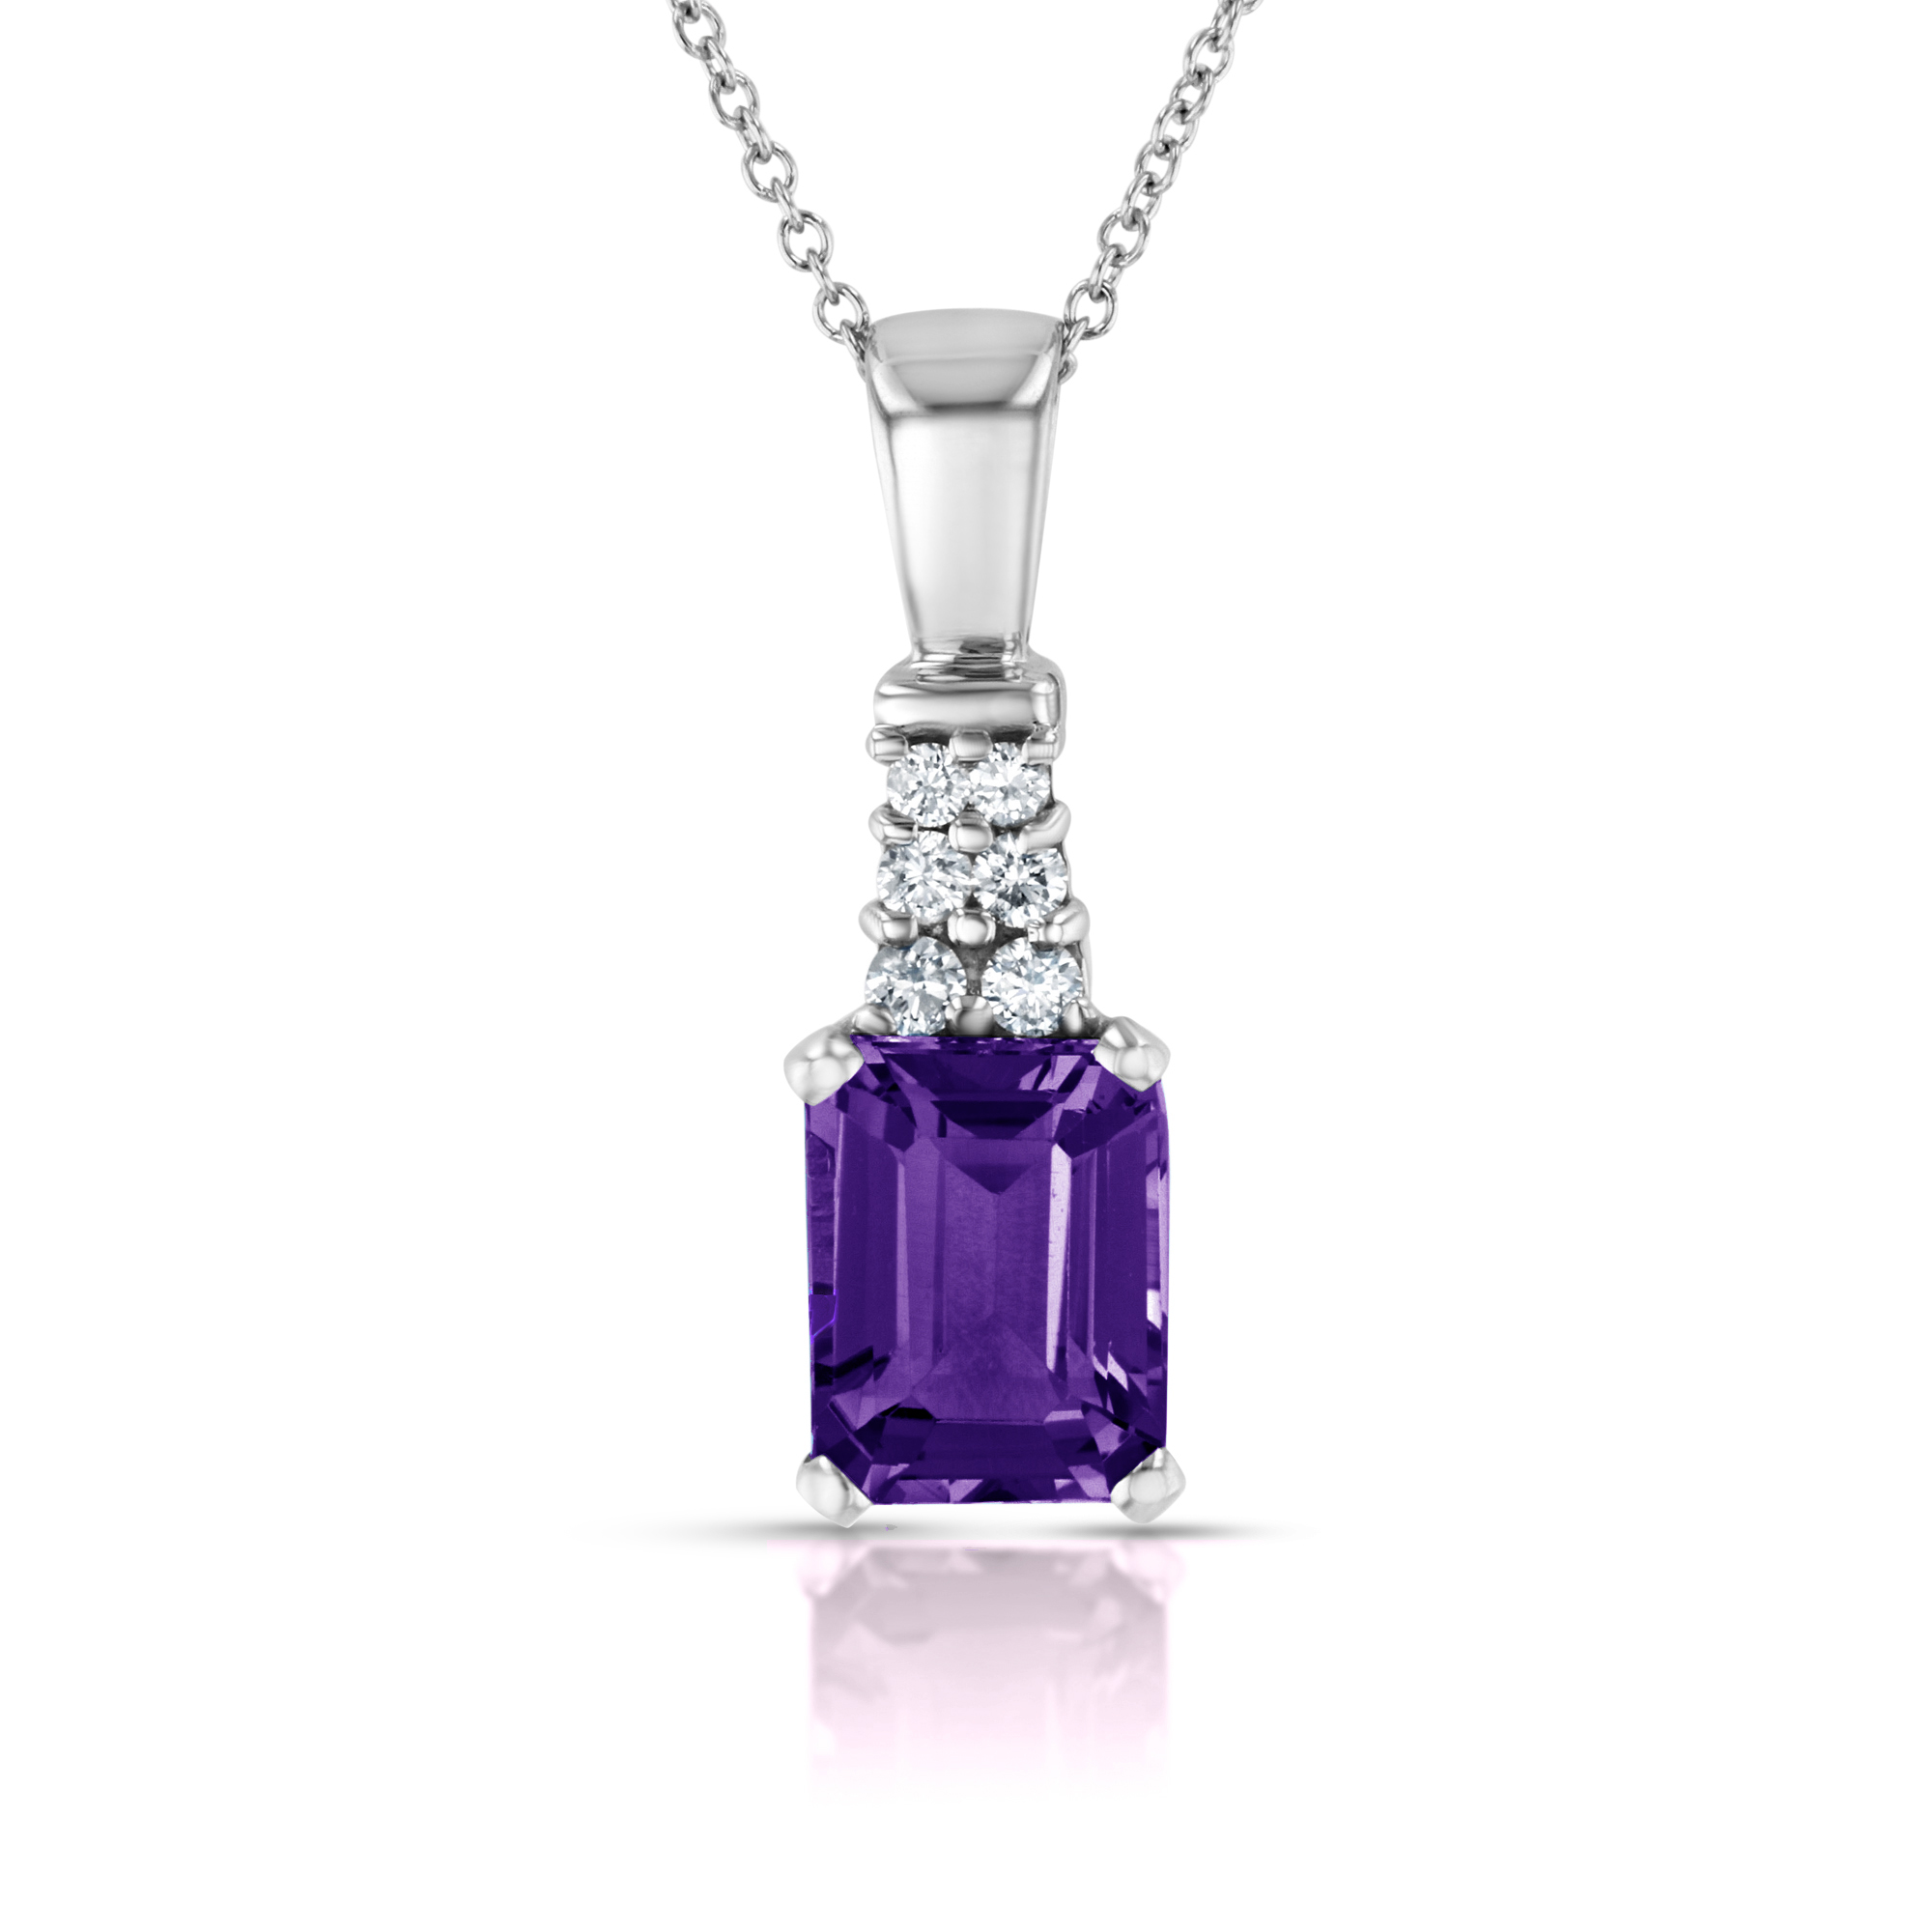 View 0.15ctw Round Diamond and Amethyst Pendant in 14k White Gold